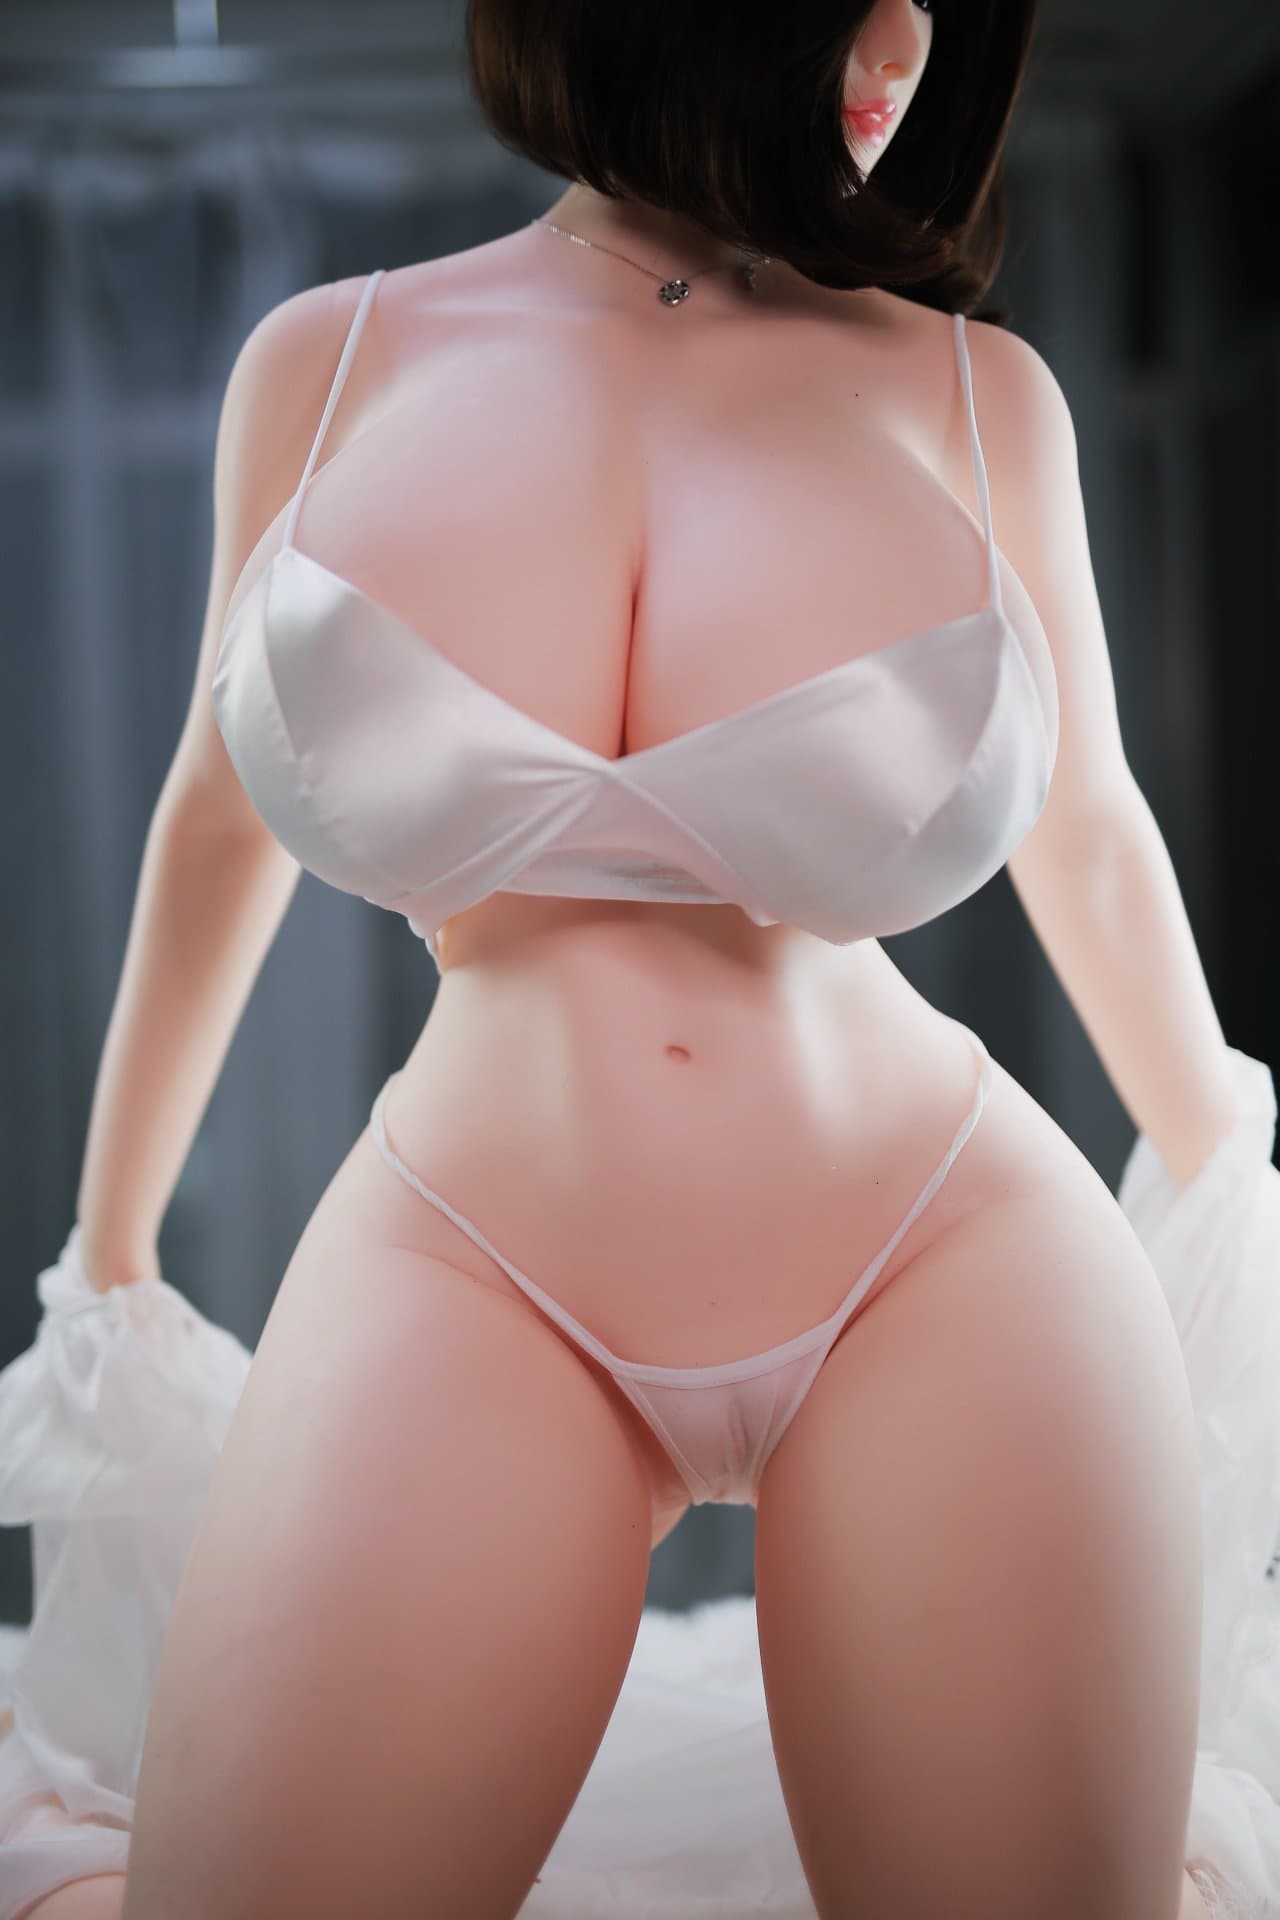 clarice 159cm 5ft3 brown hair curvy giant massive tits jy tpe sex doll(8)